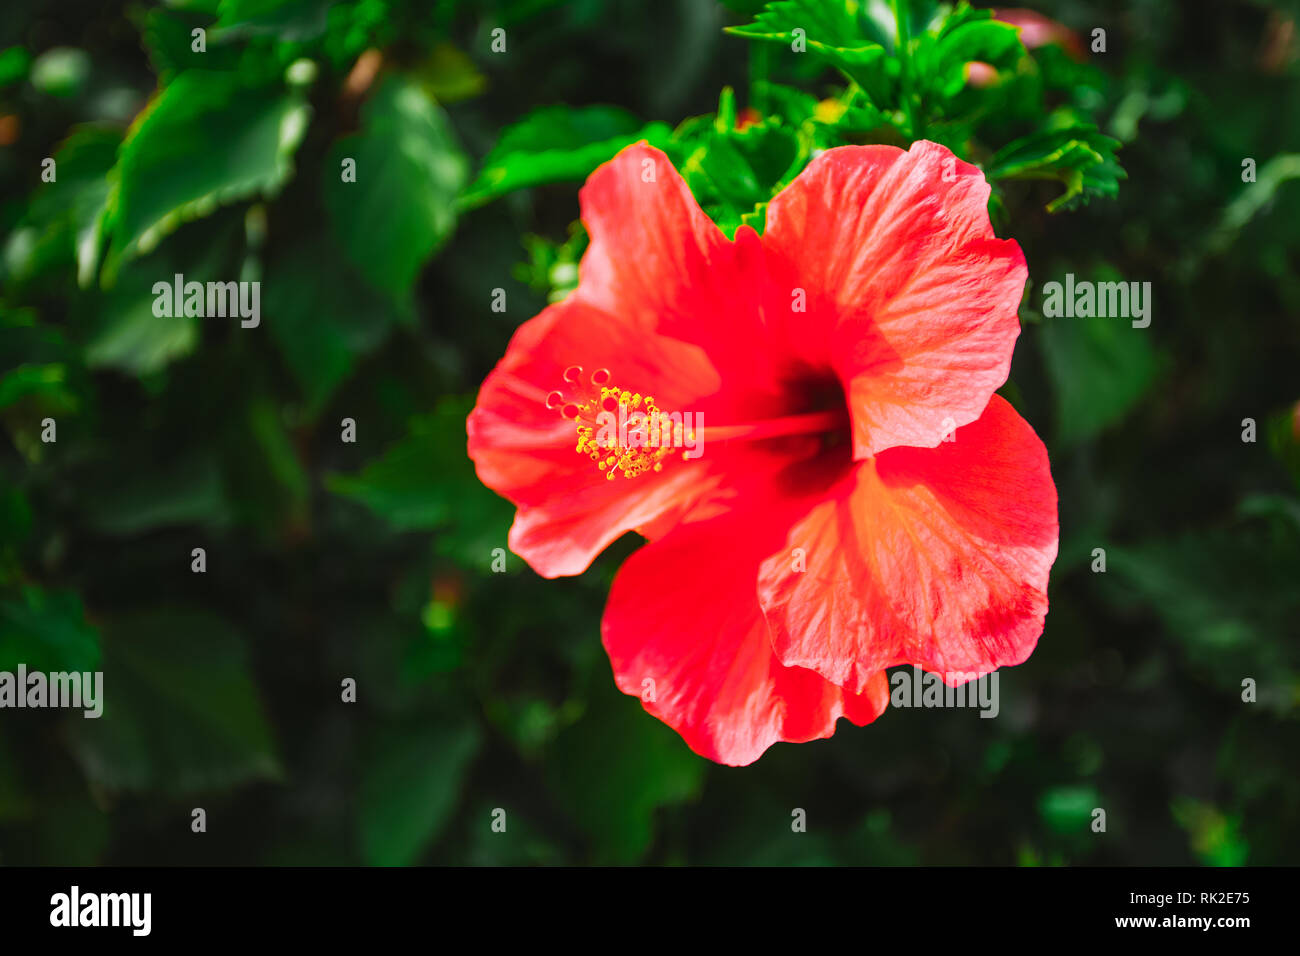 Closeup image of bright vivid red hibiscus flower growing outdoors in park or garden. Horizontal color photography. Stock Photo